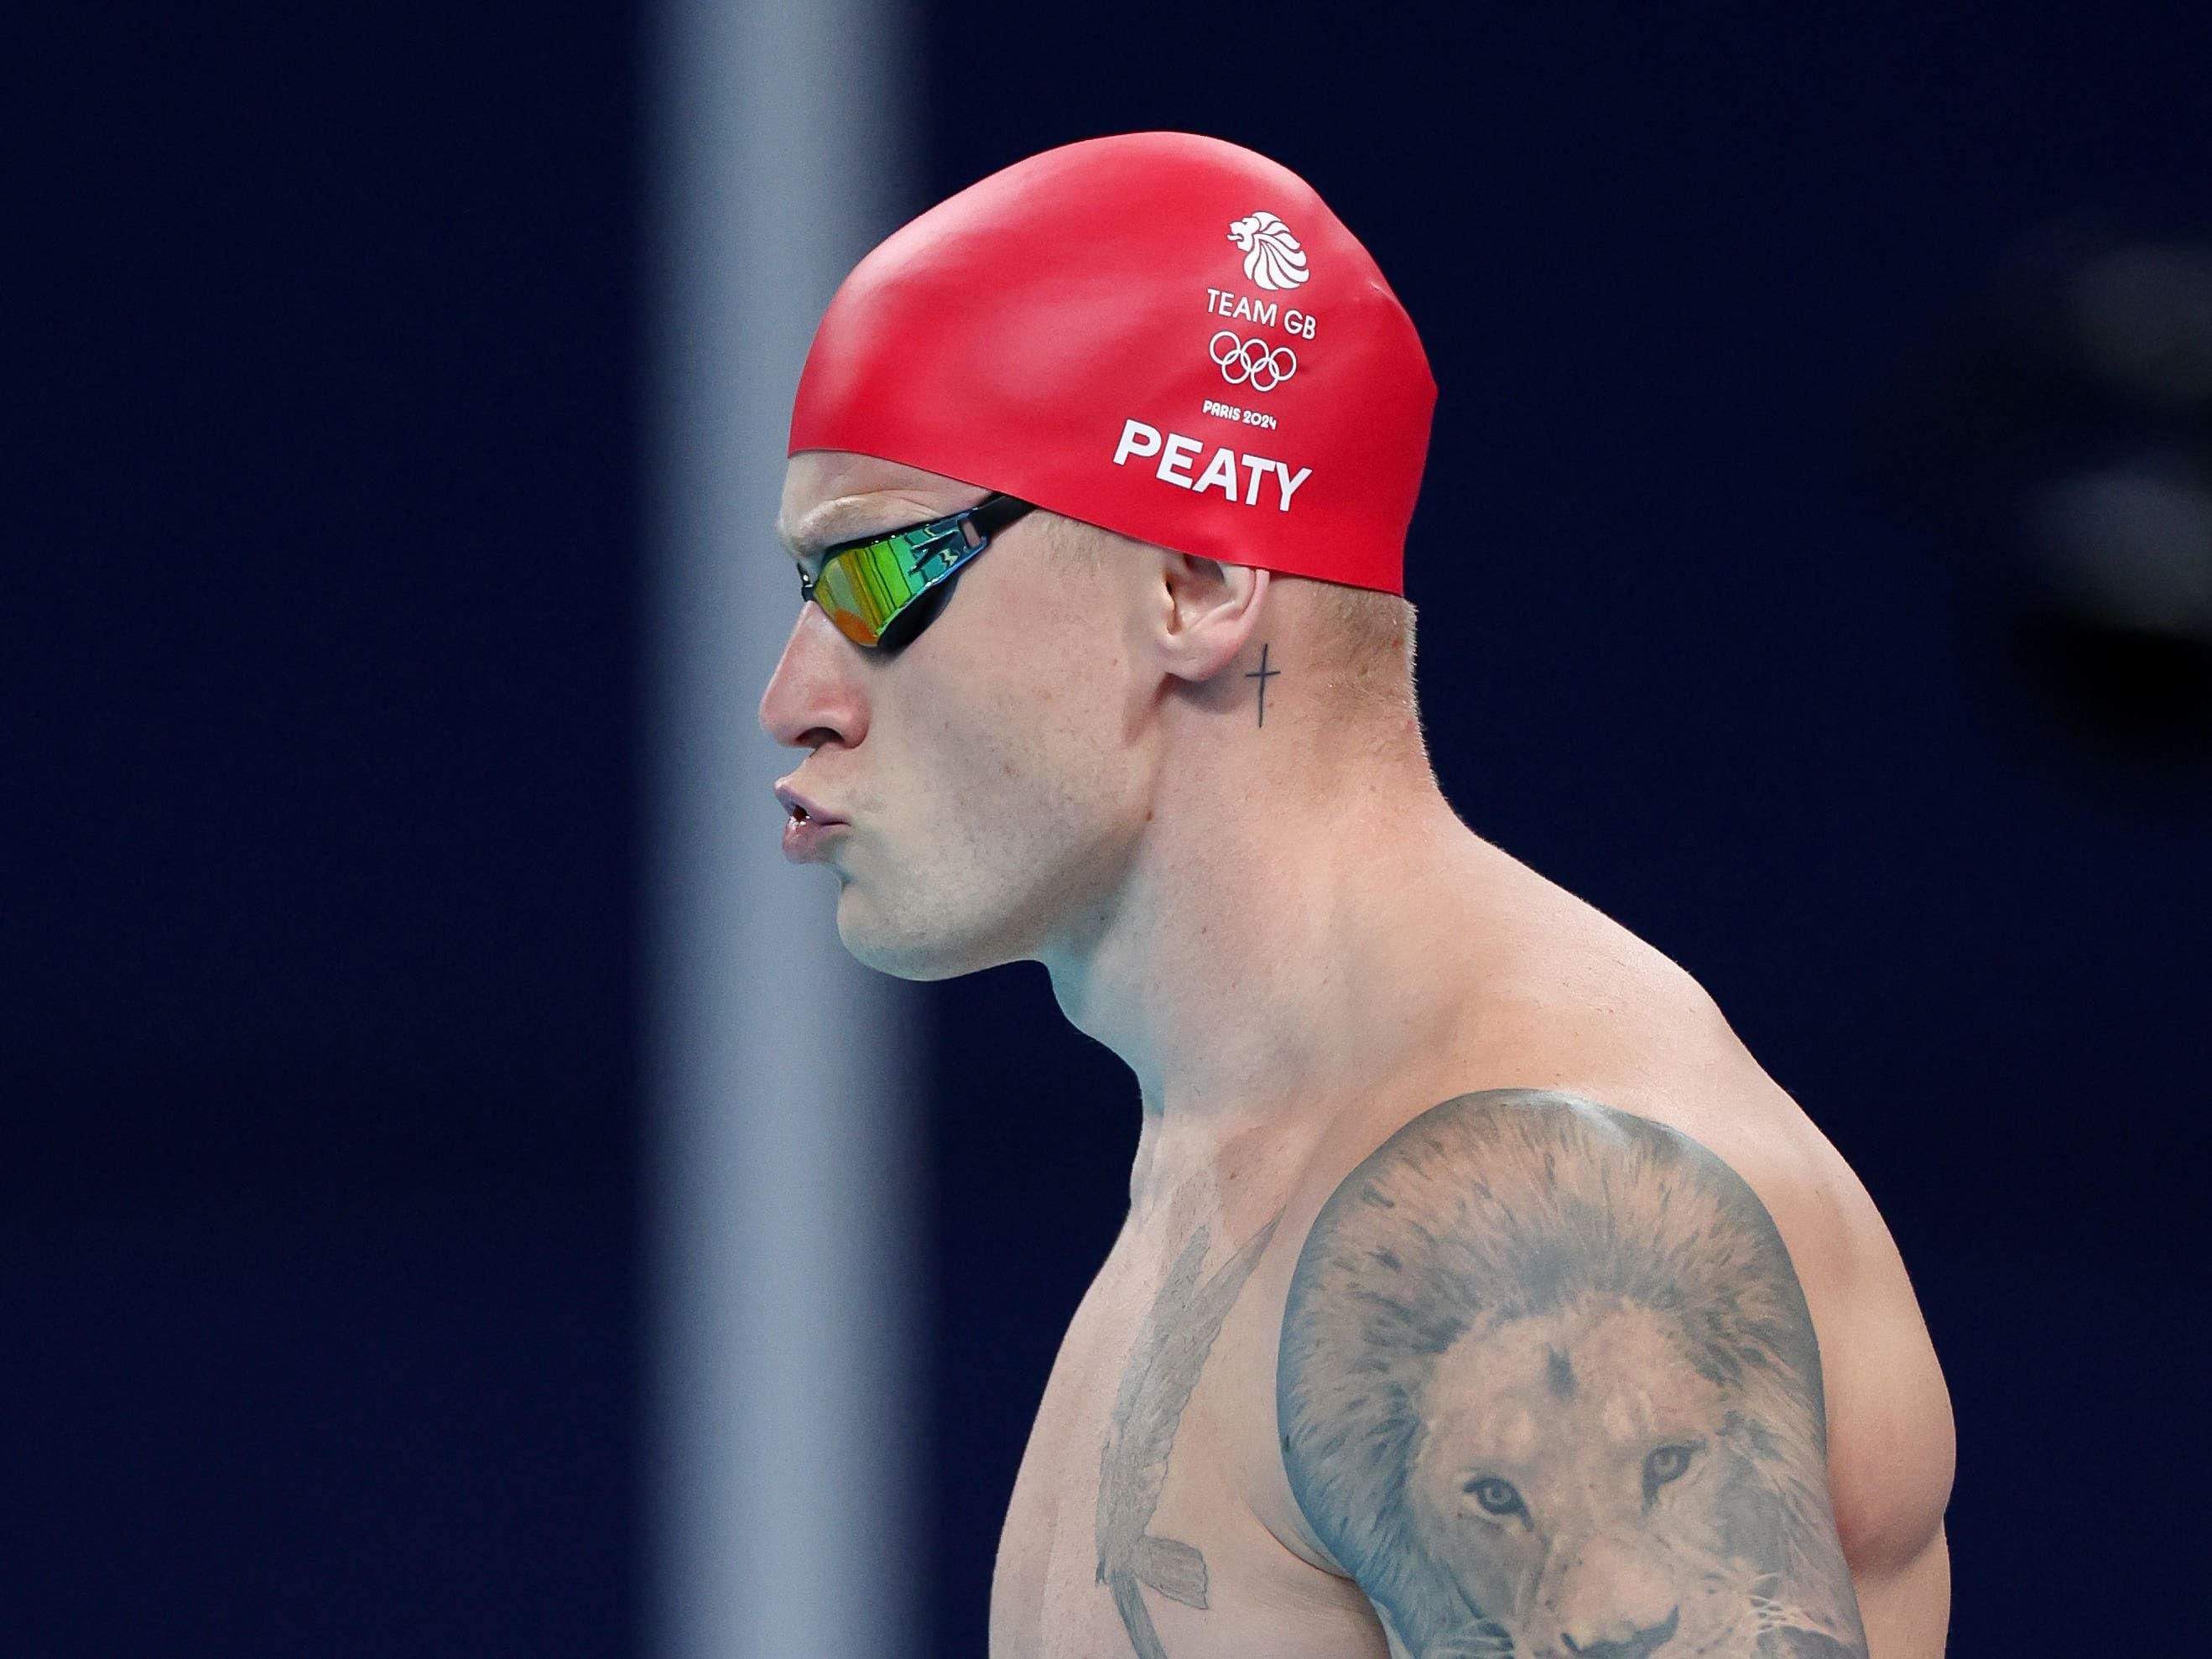 Adam Peaty says his big rival Qin Haiyang should be ‘out of the sport’